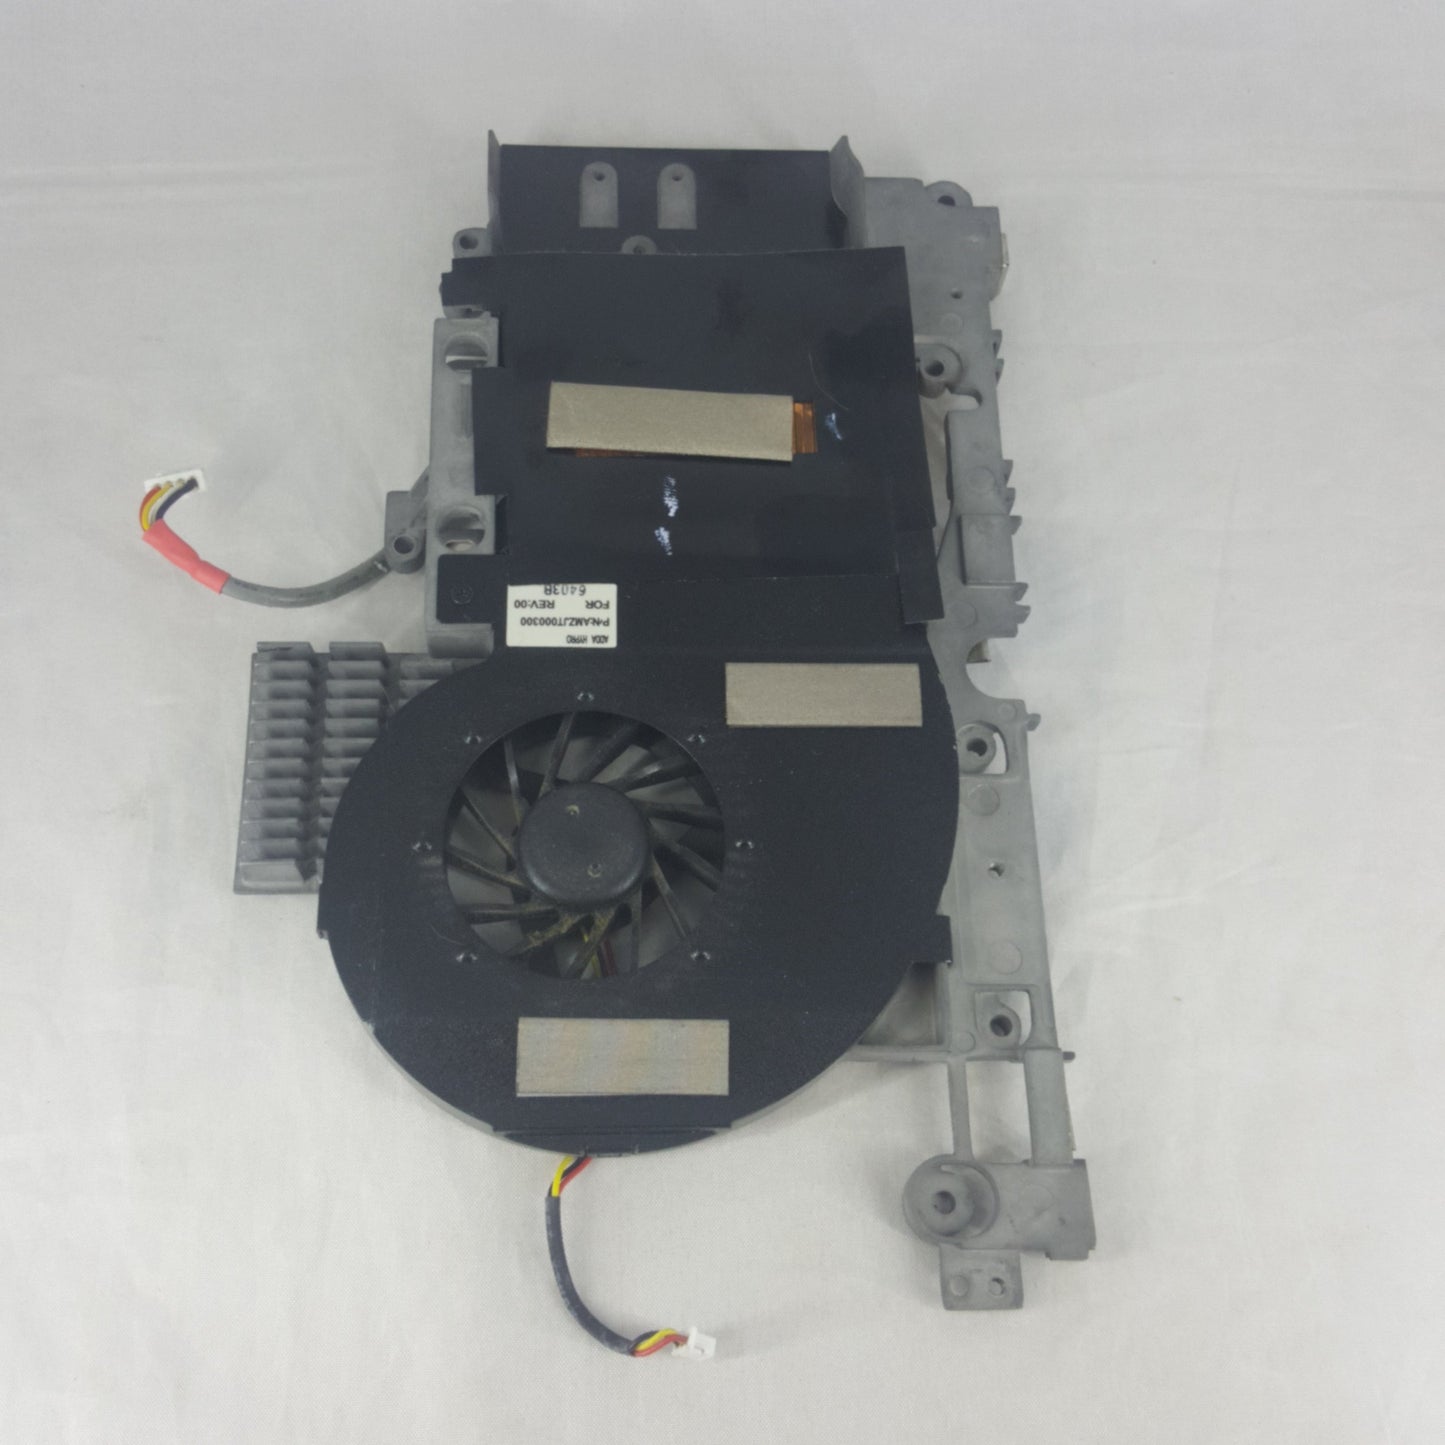 Computer System Cooling Parts - HEWLETT PACKARD HP Pavilion Laptop SPS-414226-001